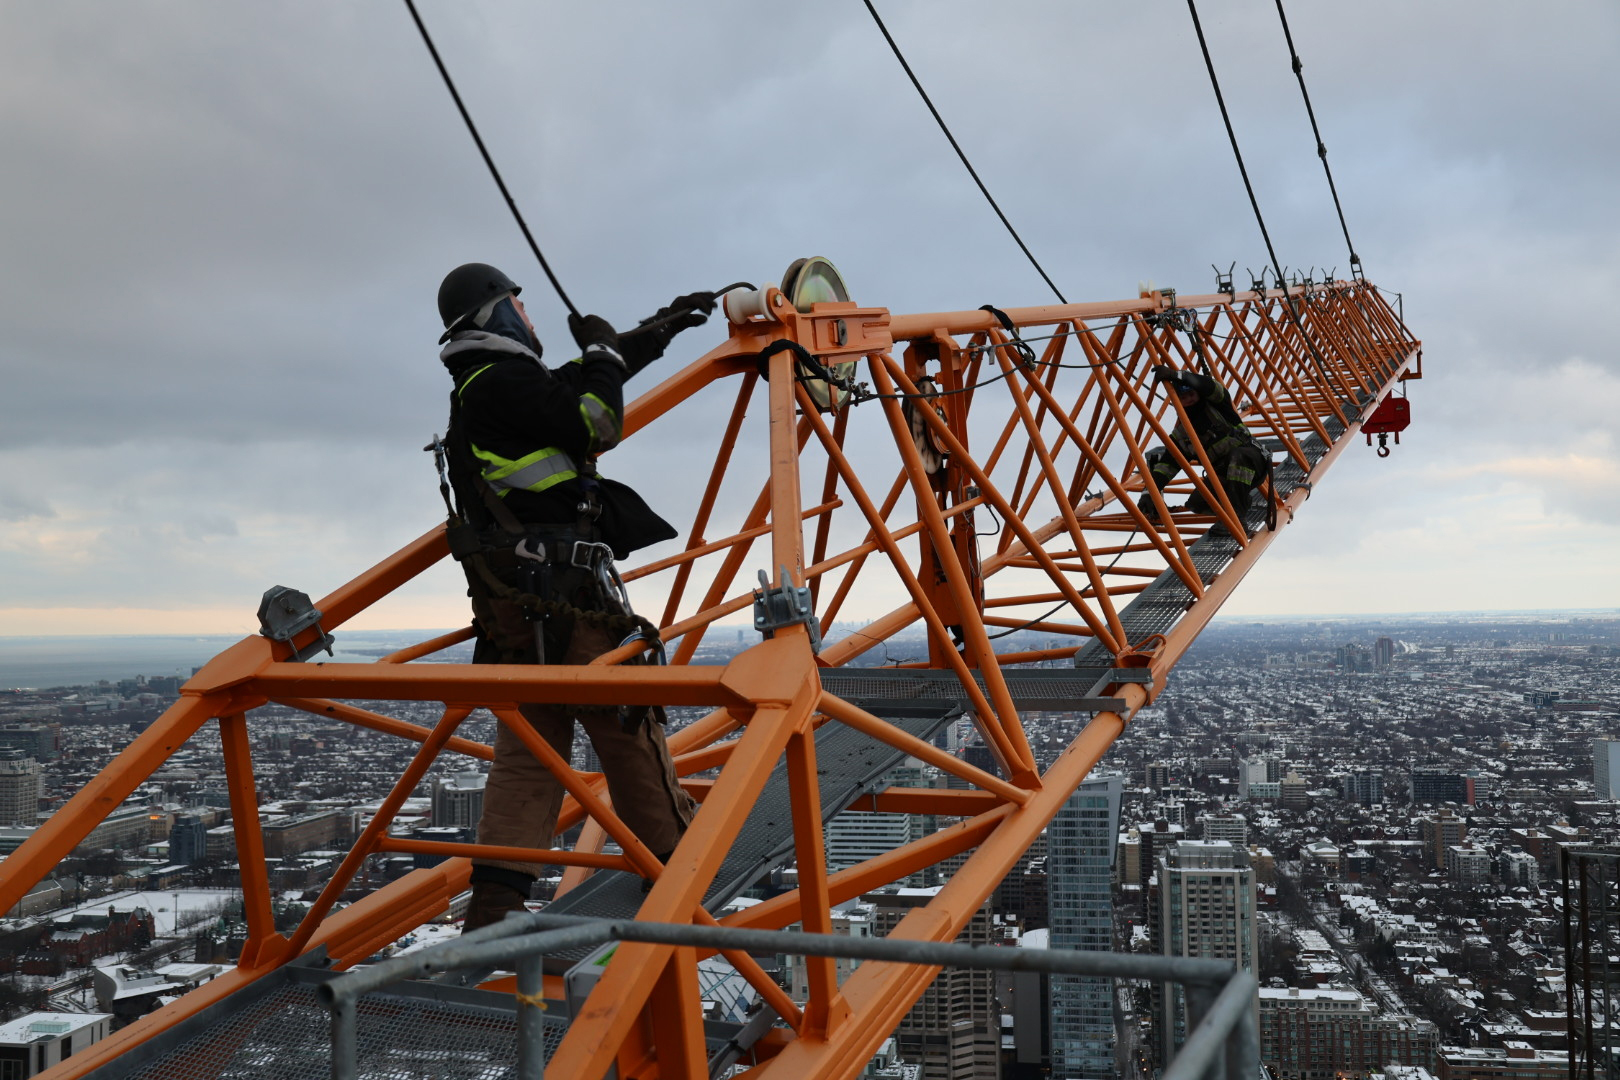 Member adjusting cable on the edge of the crane at great heights